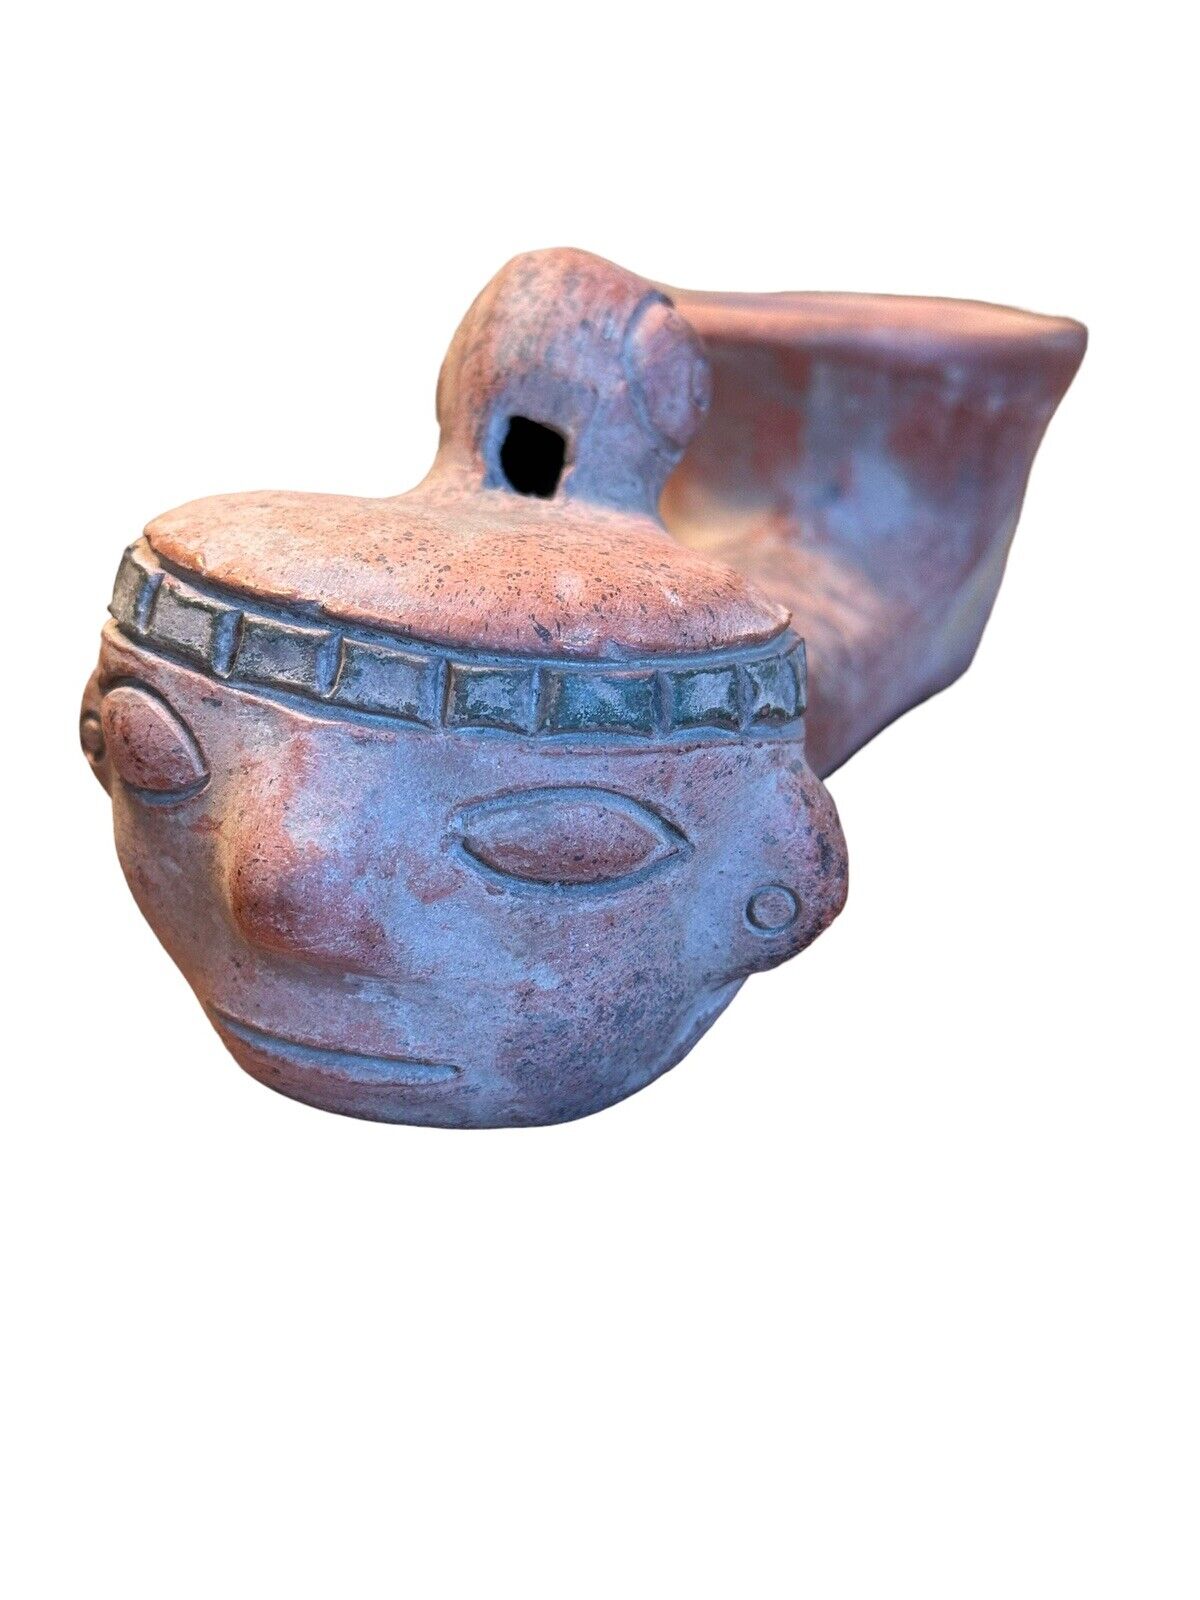 Mayan Whistling Jar Clay Jug Instrument Whistles with Water Mexico Vintage